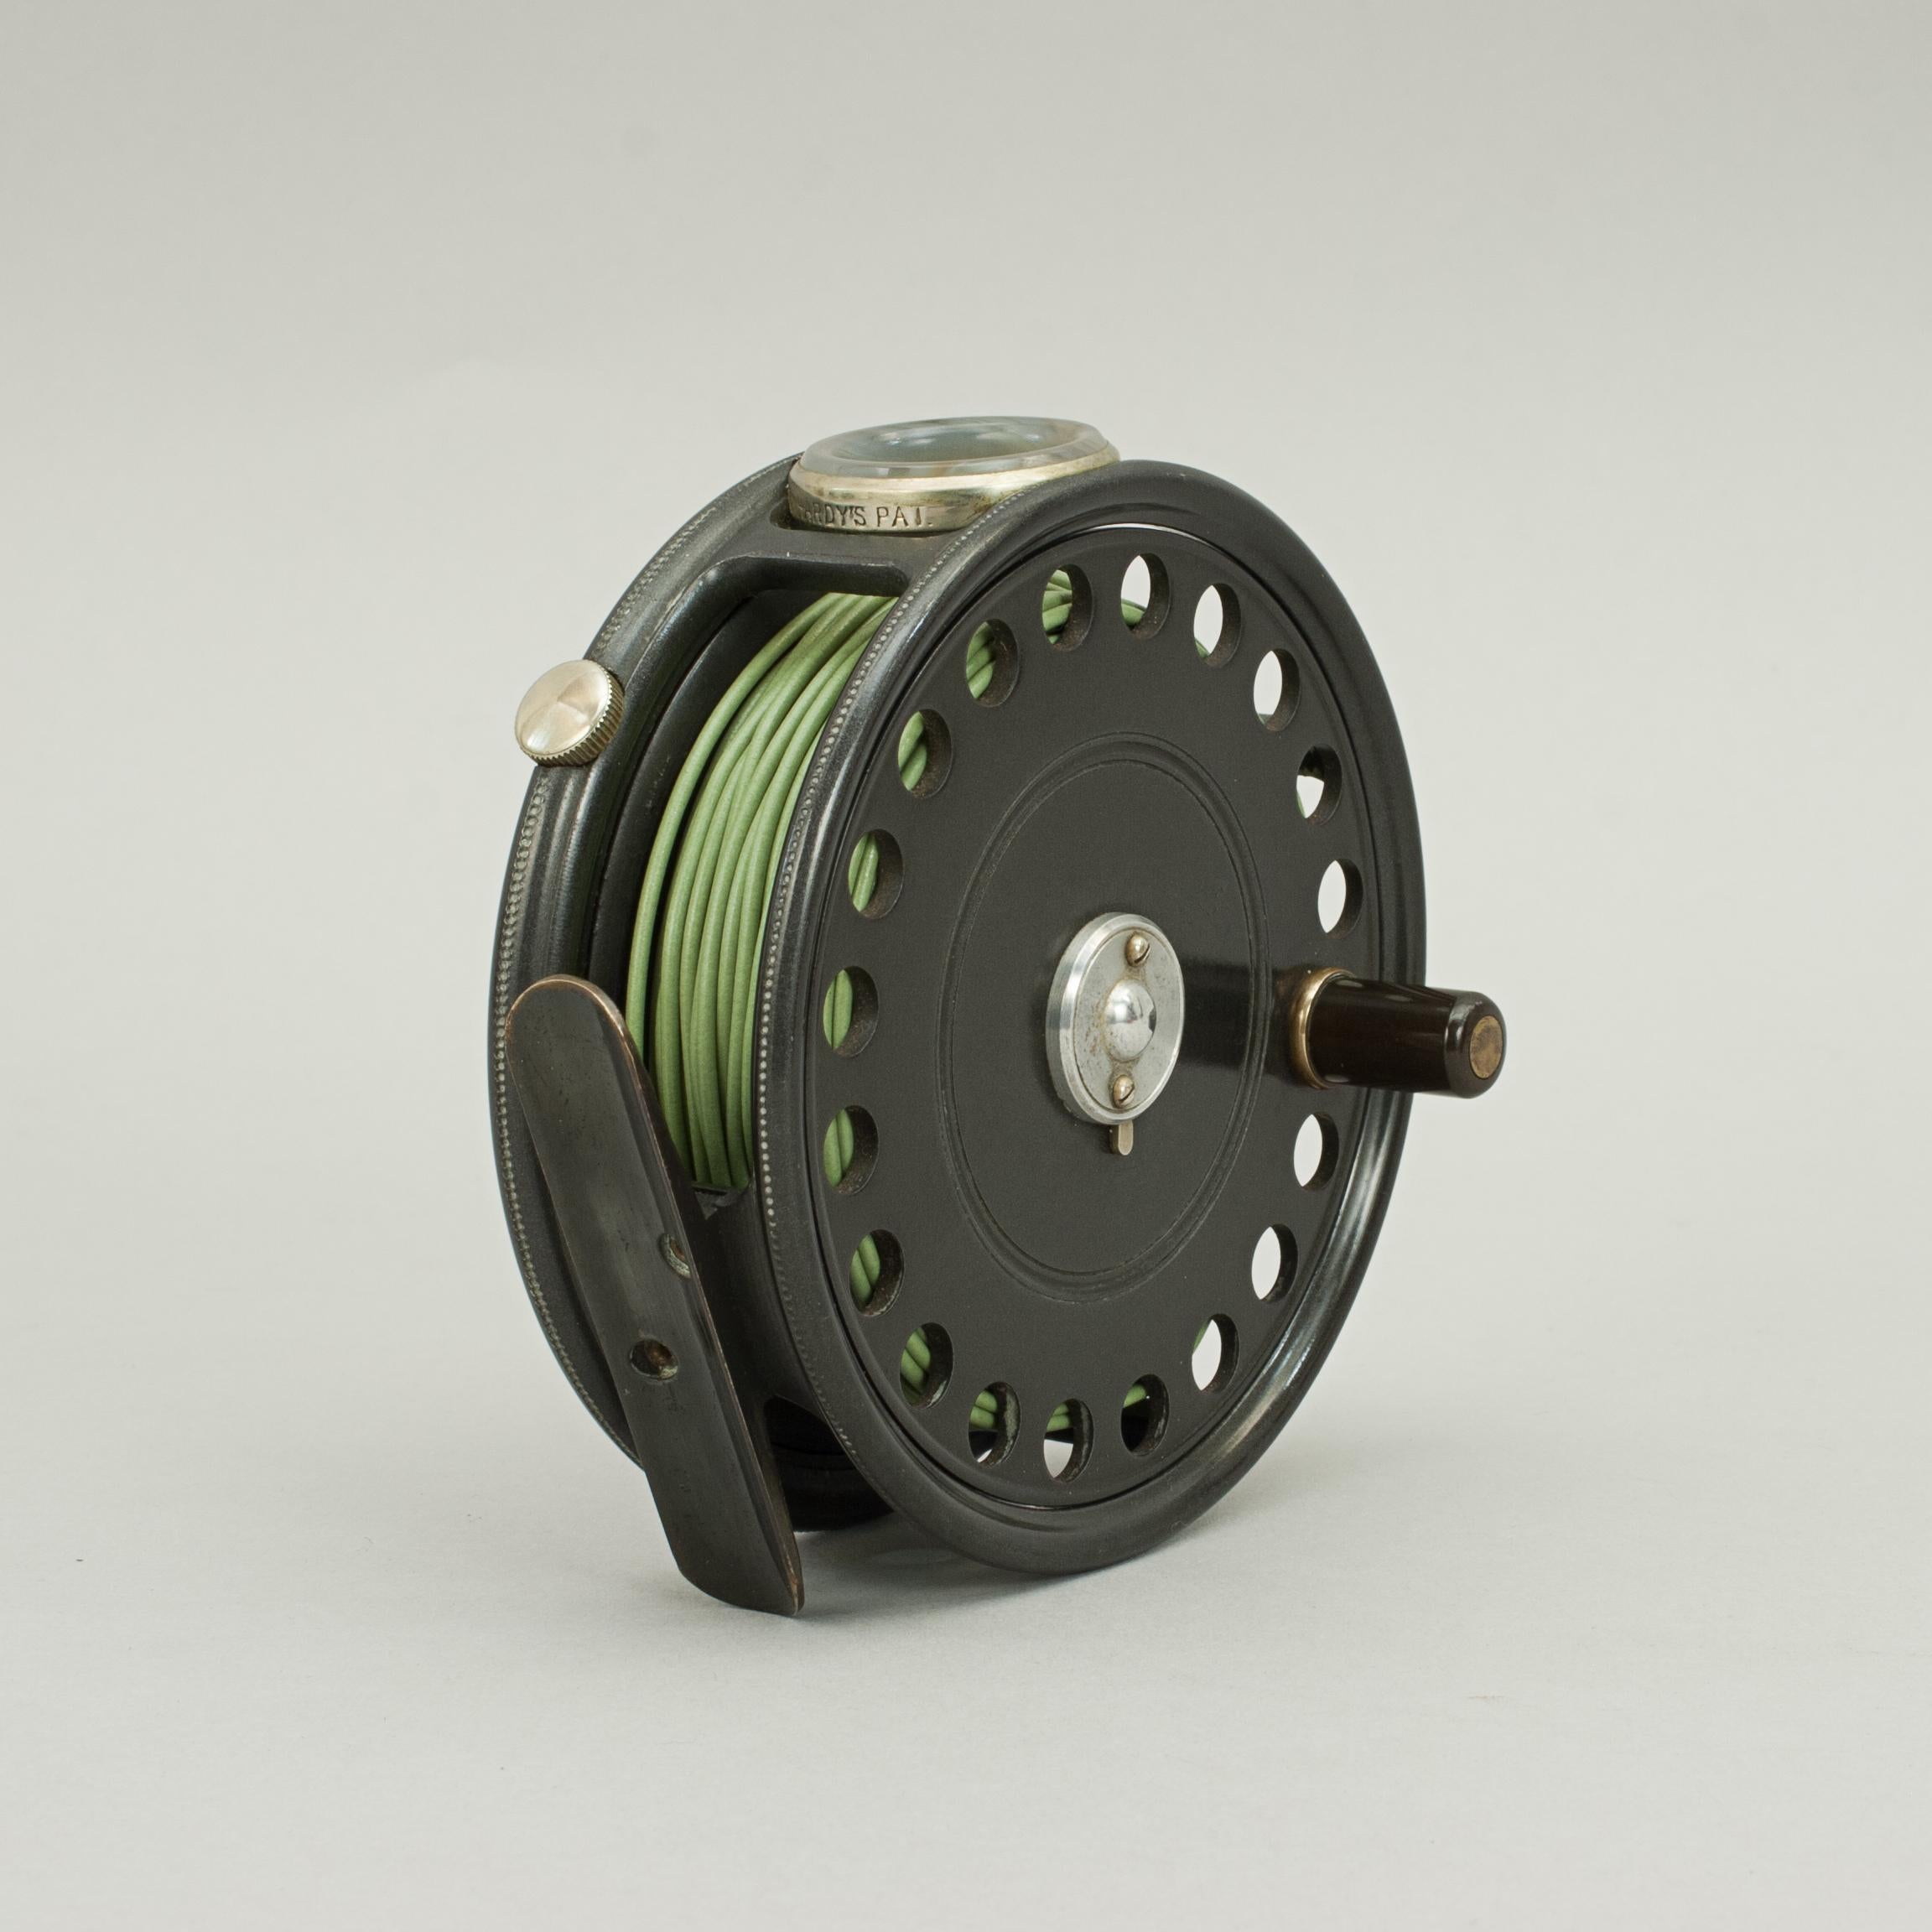 St George Fly Fishing Reel by Hardy Bros 1